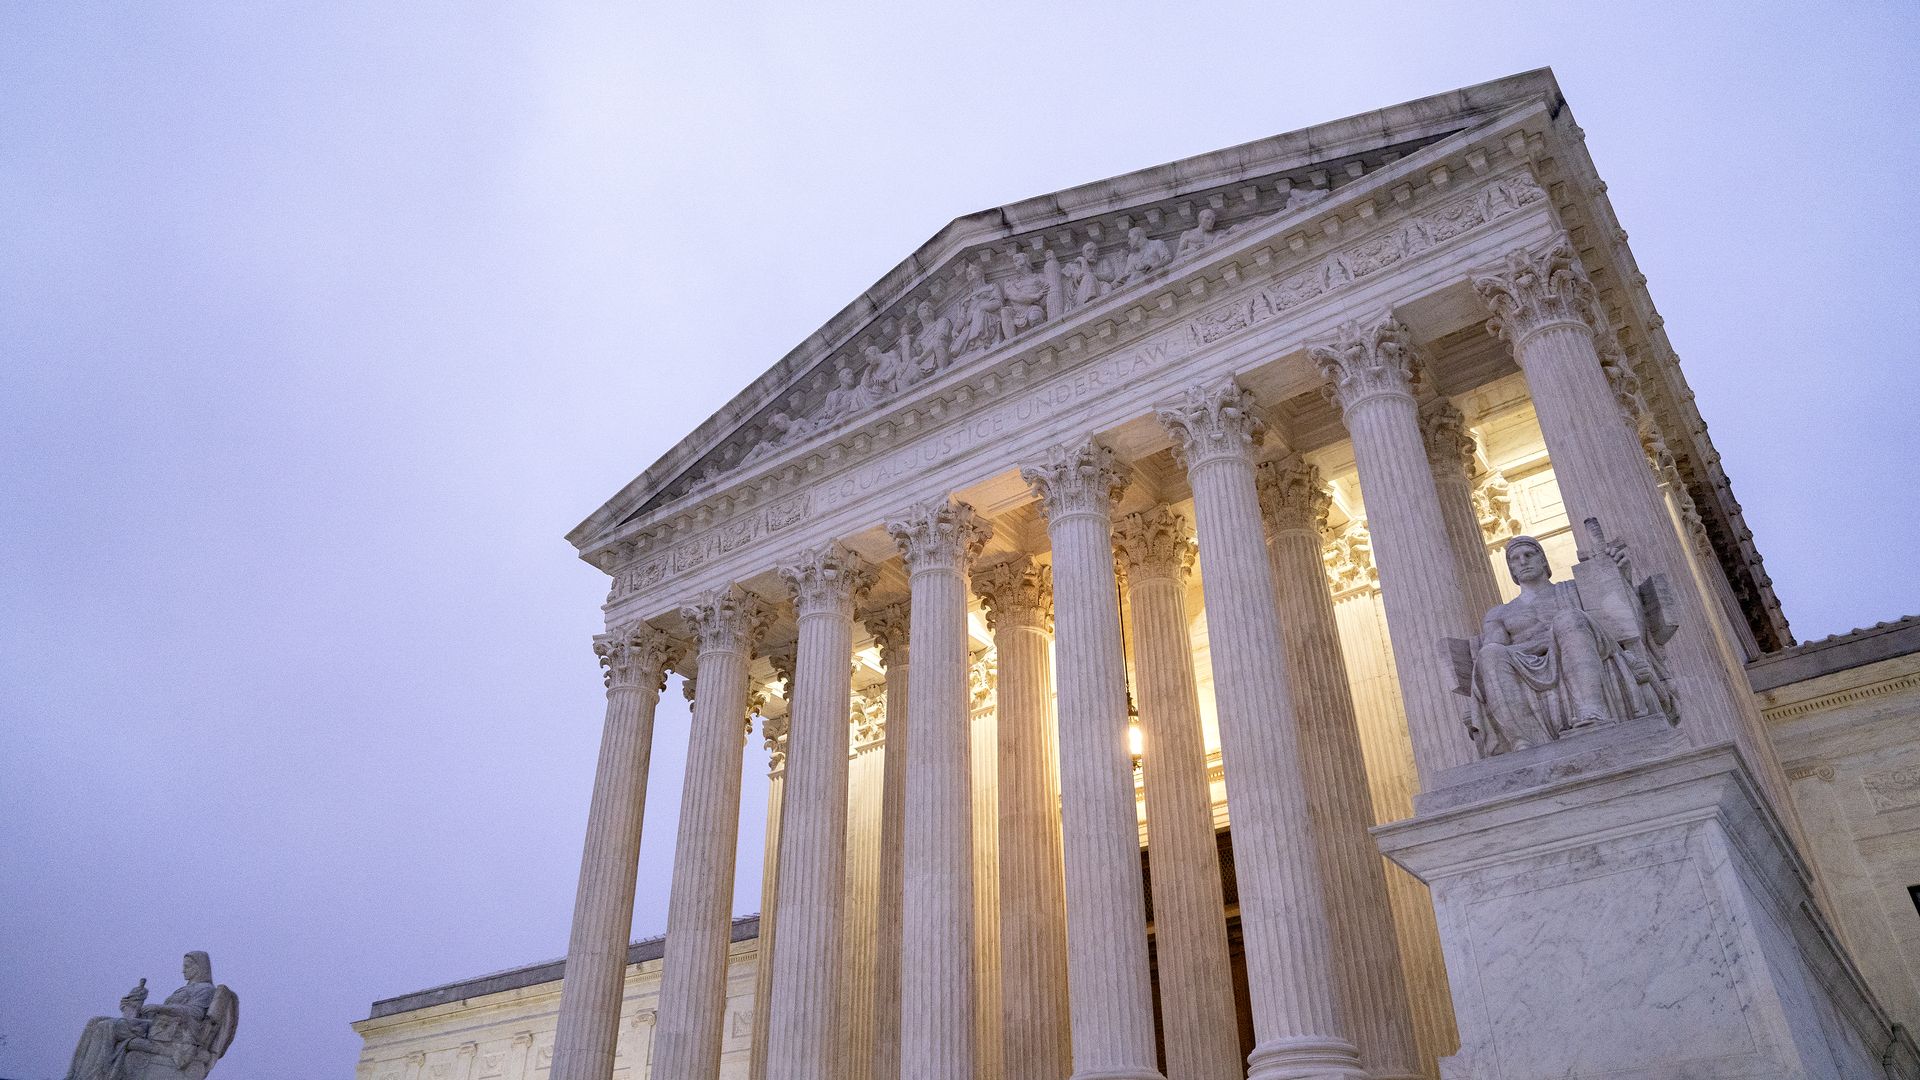 Photo of the U.S. Supreme Court building against a violet sky